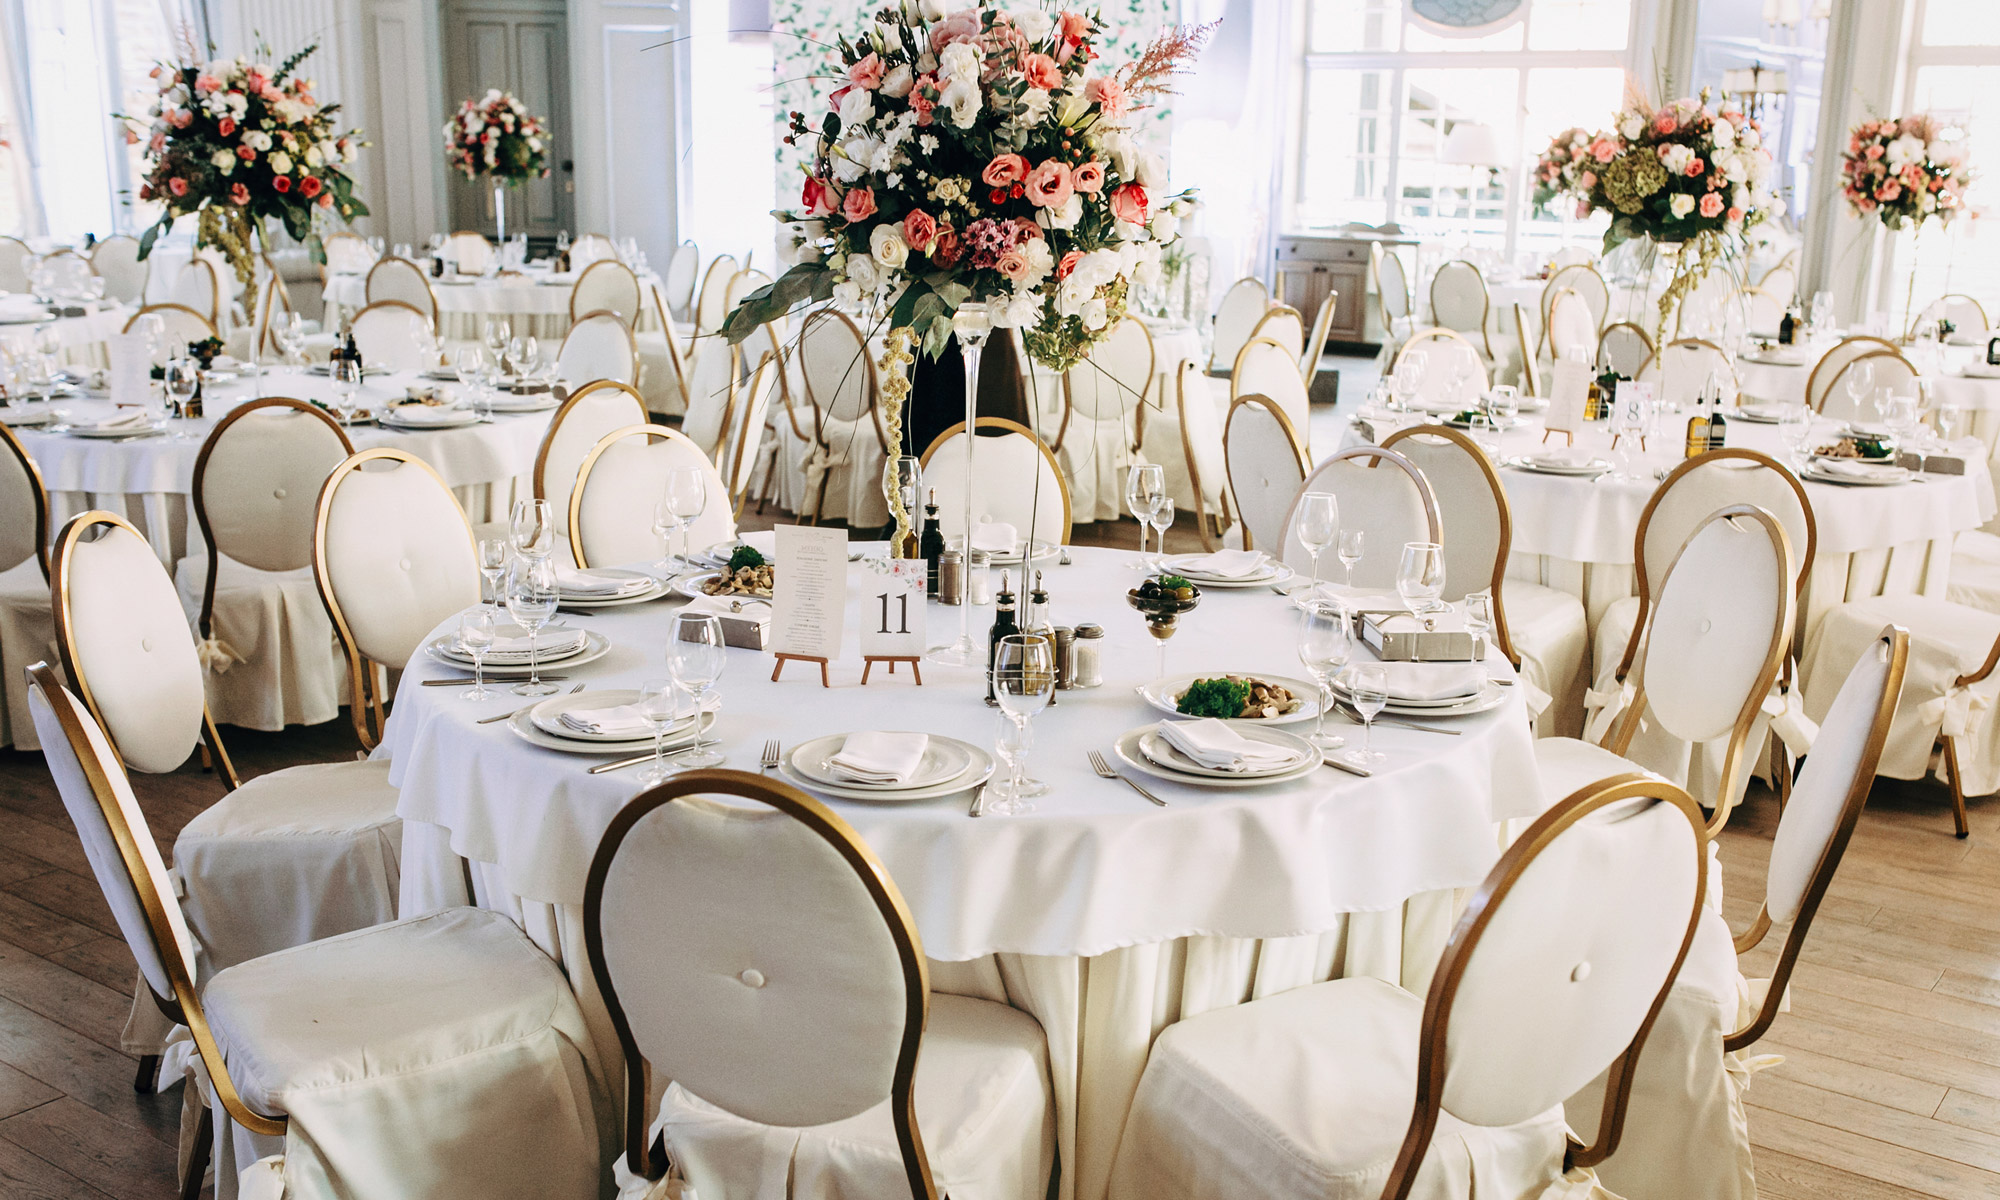 Ask These Questions Before Booking an Event Venue